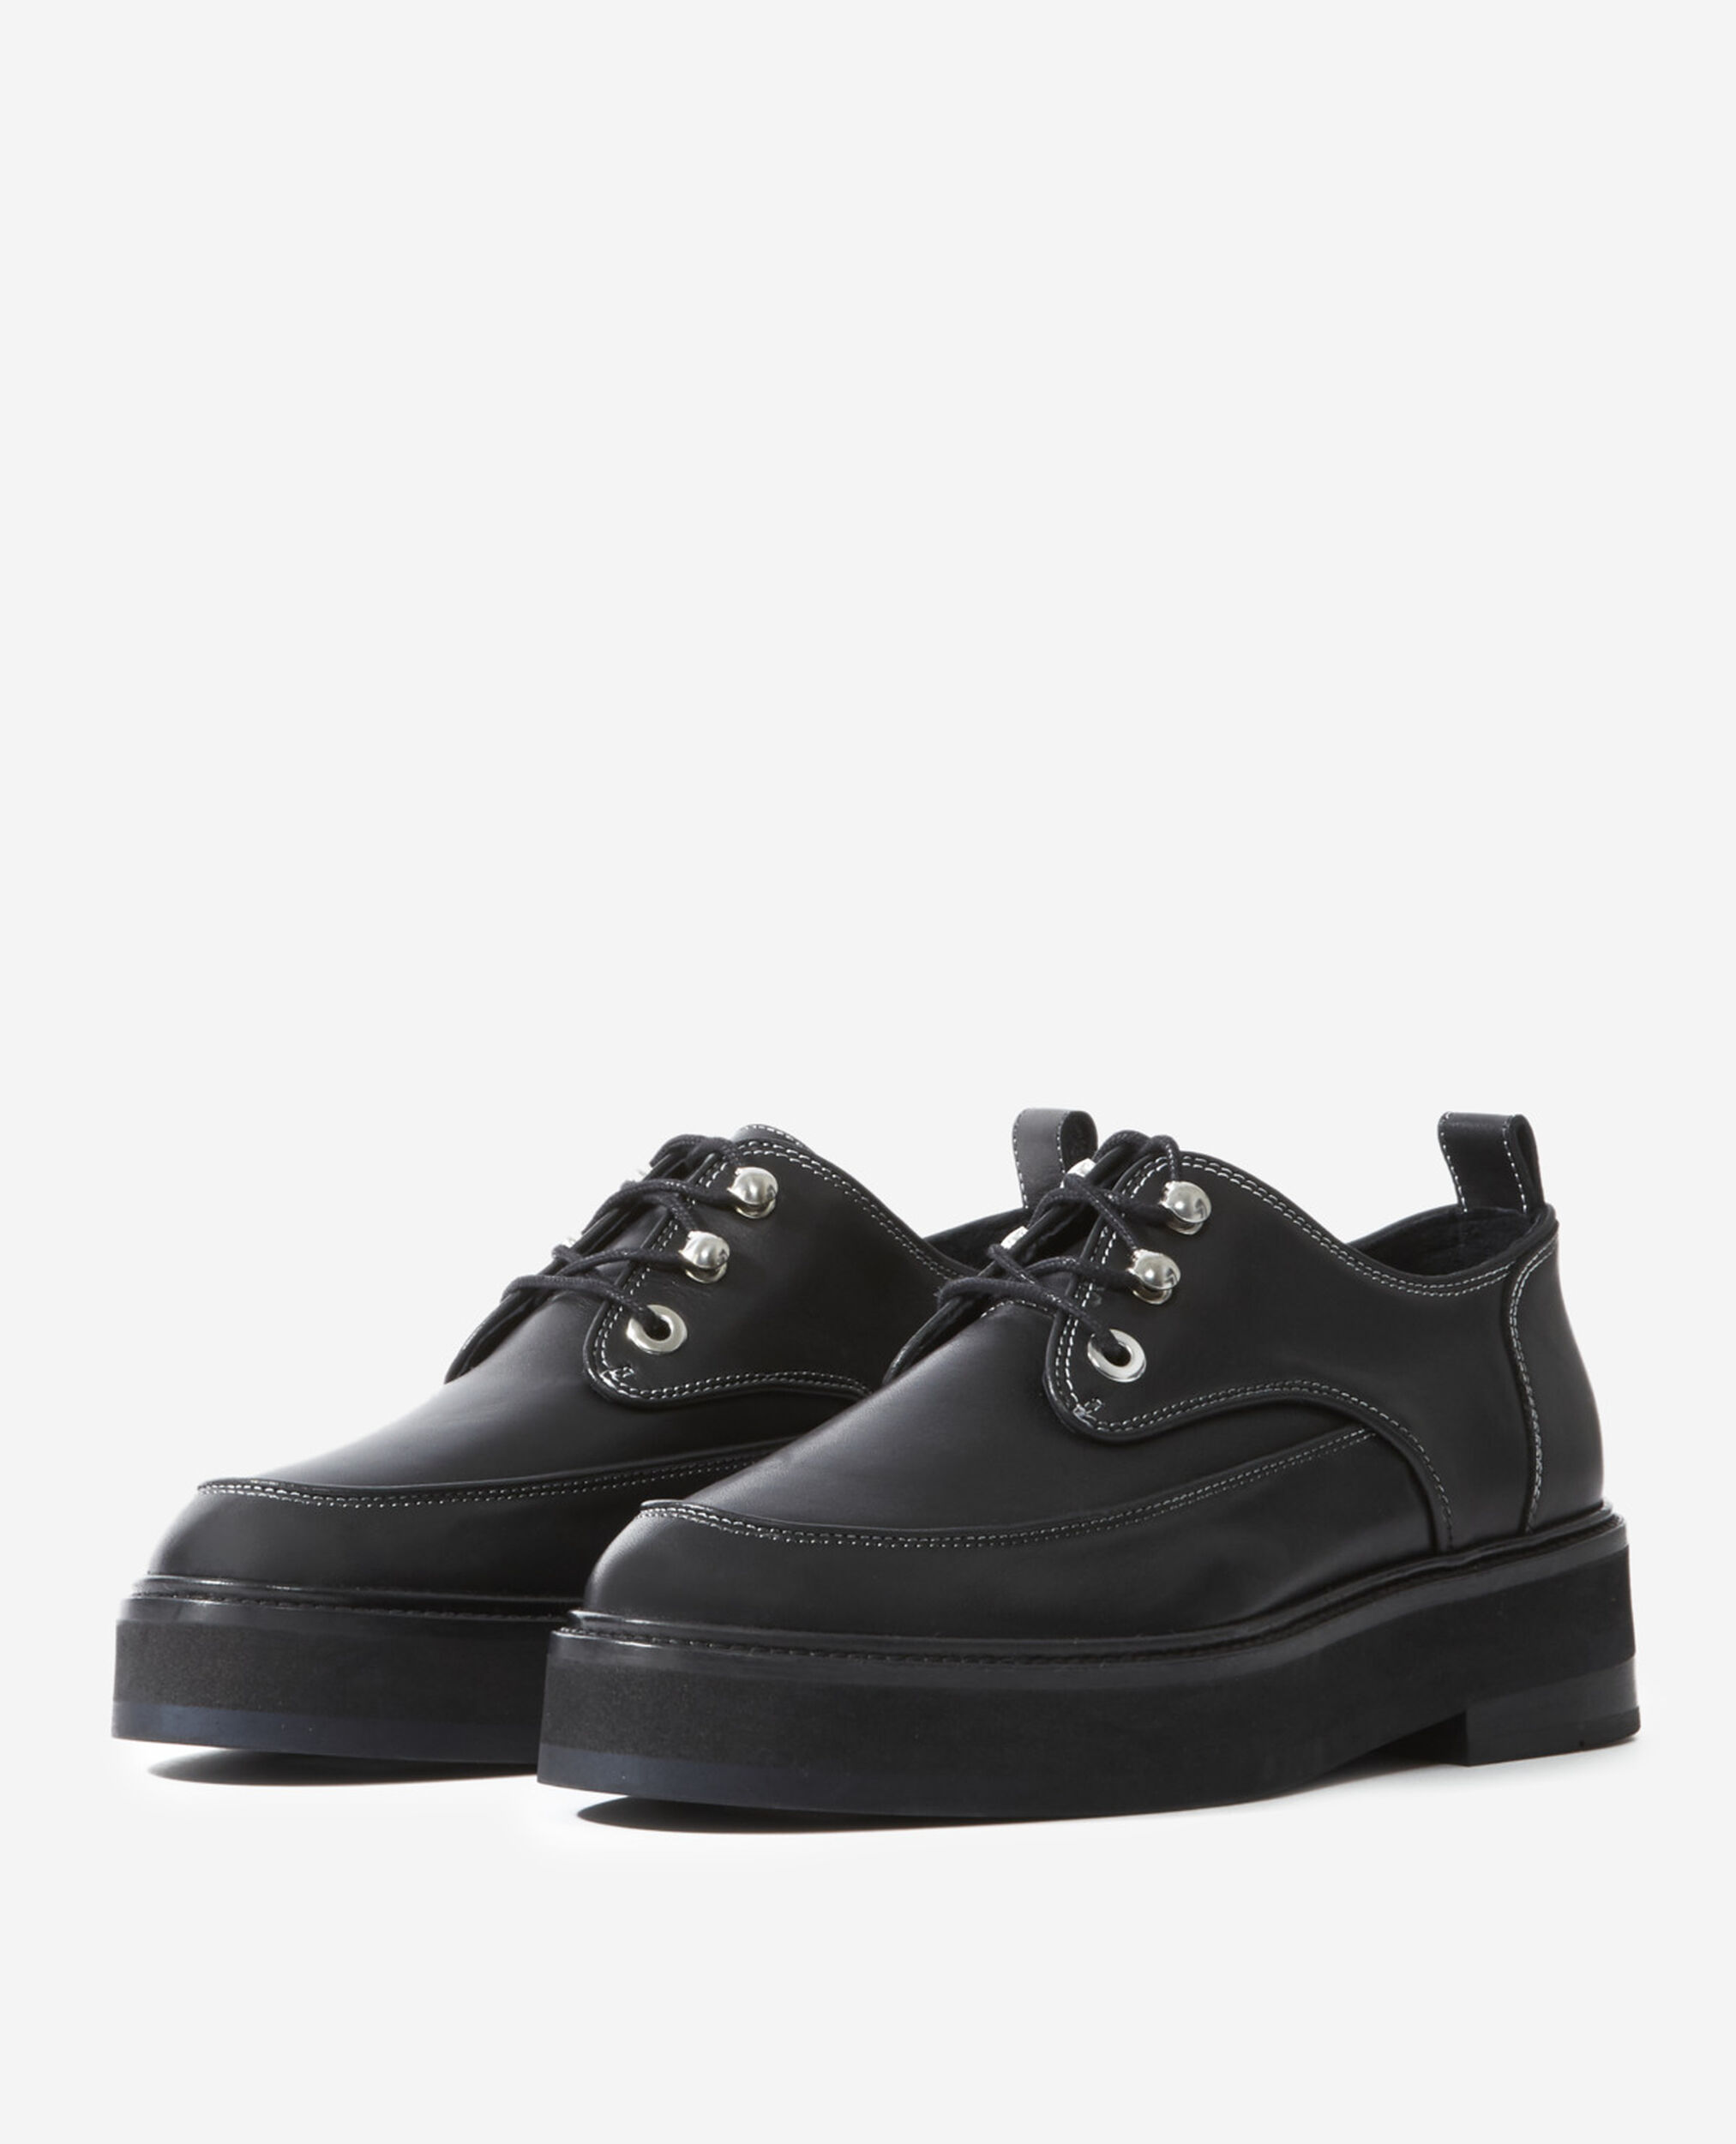 Black leather derbies with topstitching, BLACK, hi-res image number null